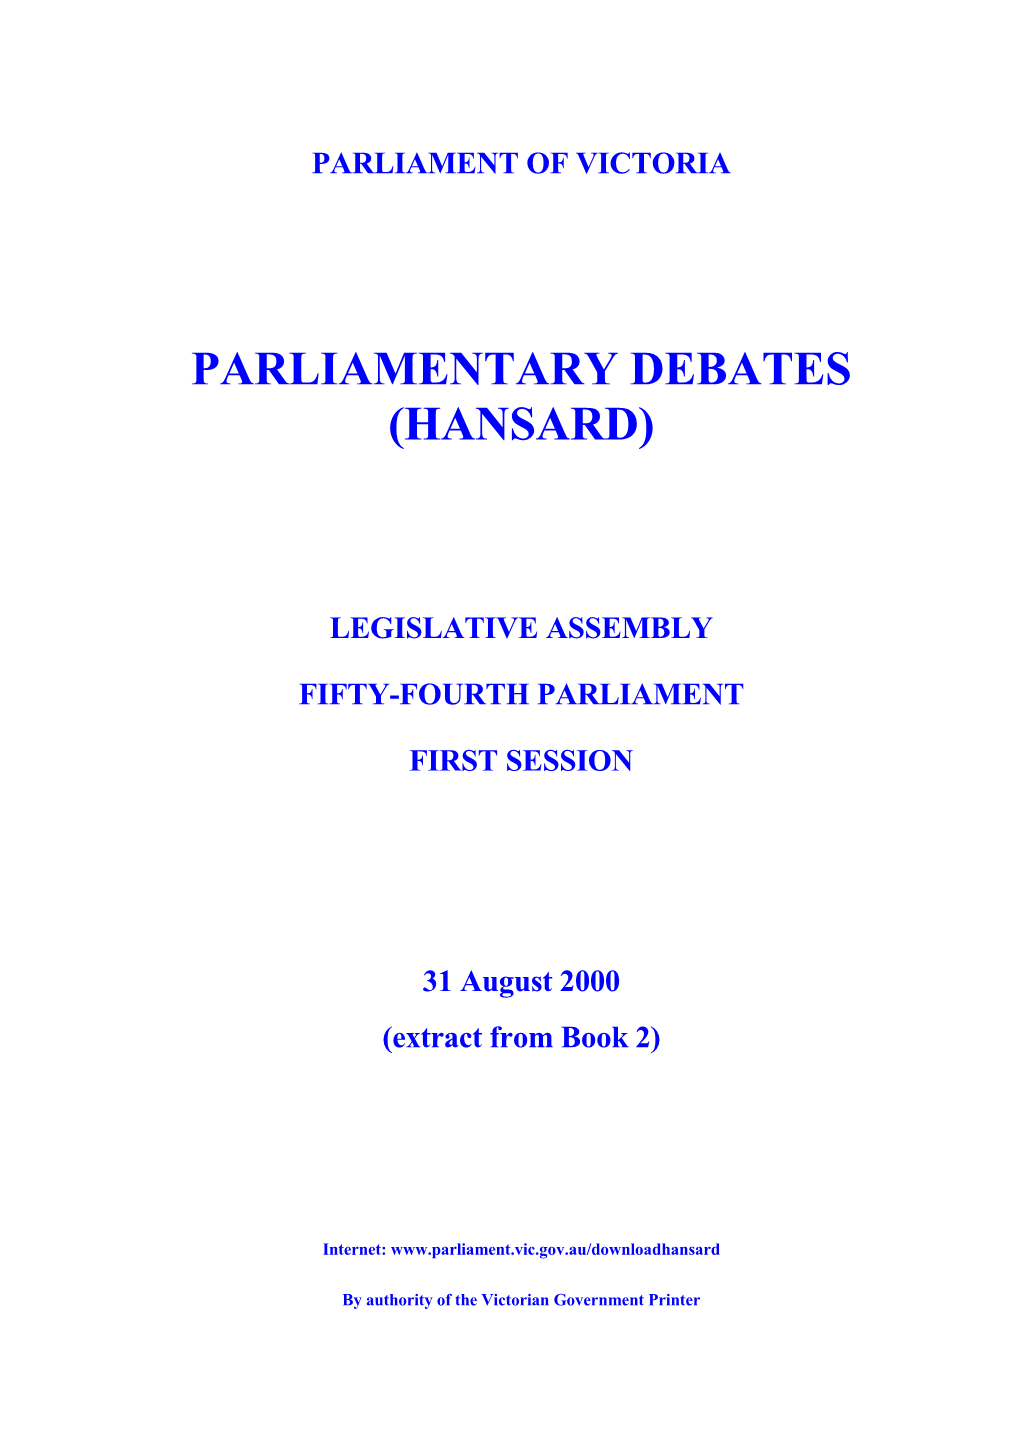 Assembly Parlynet Extract 31 August 2000 from Book 2